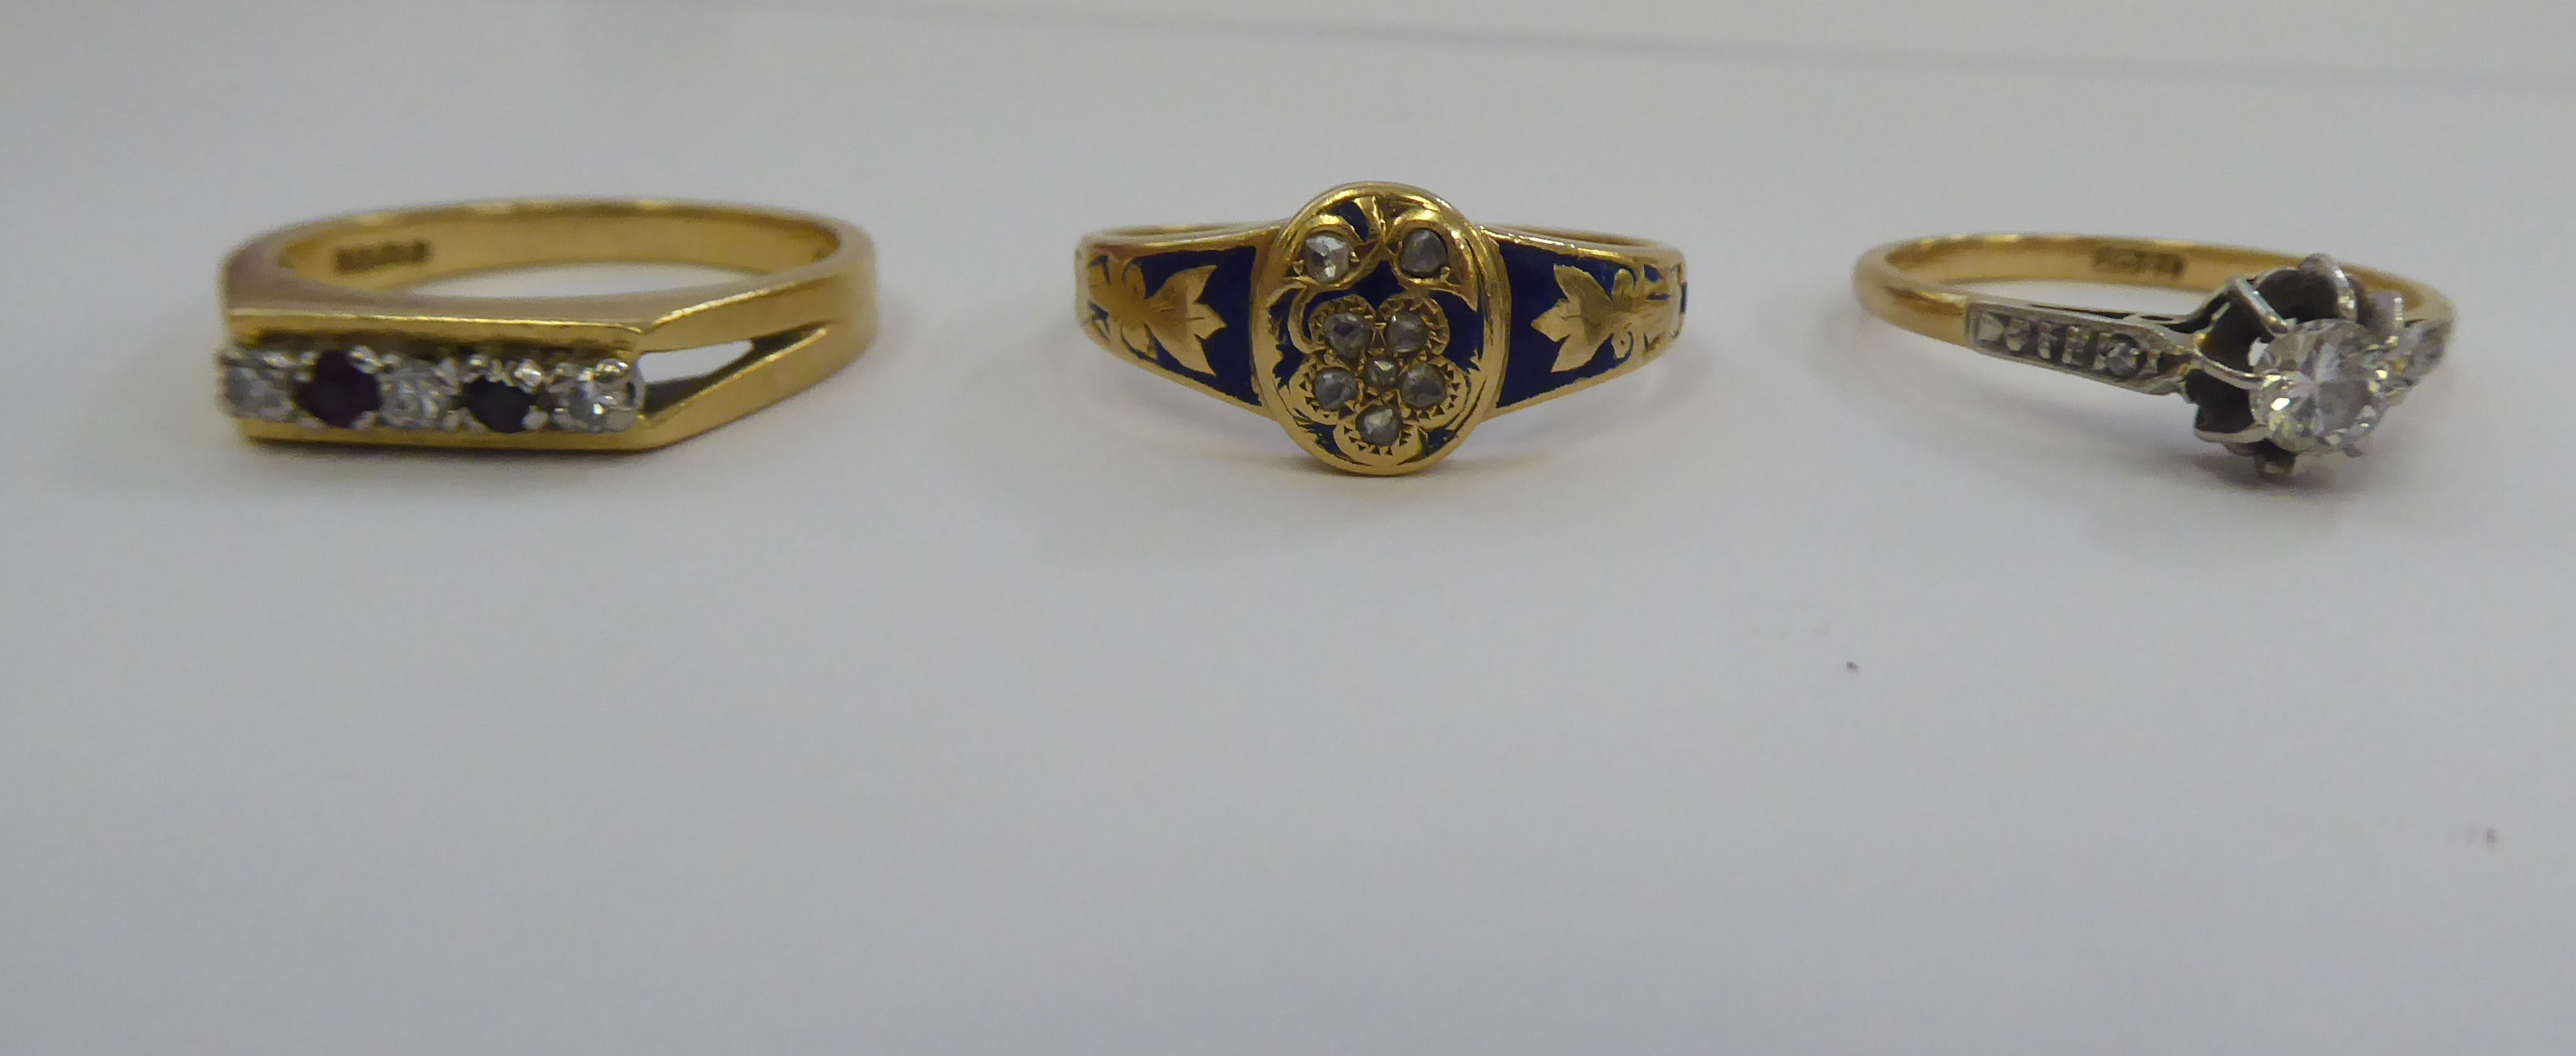 A late Victorian 18ct gold and blue enamel mourning ring; an 18ct gold claw set diamond ring; and